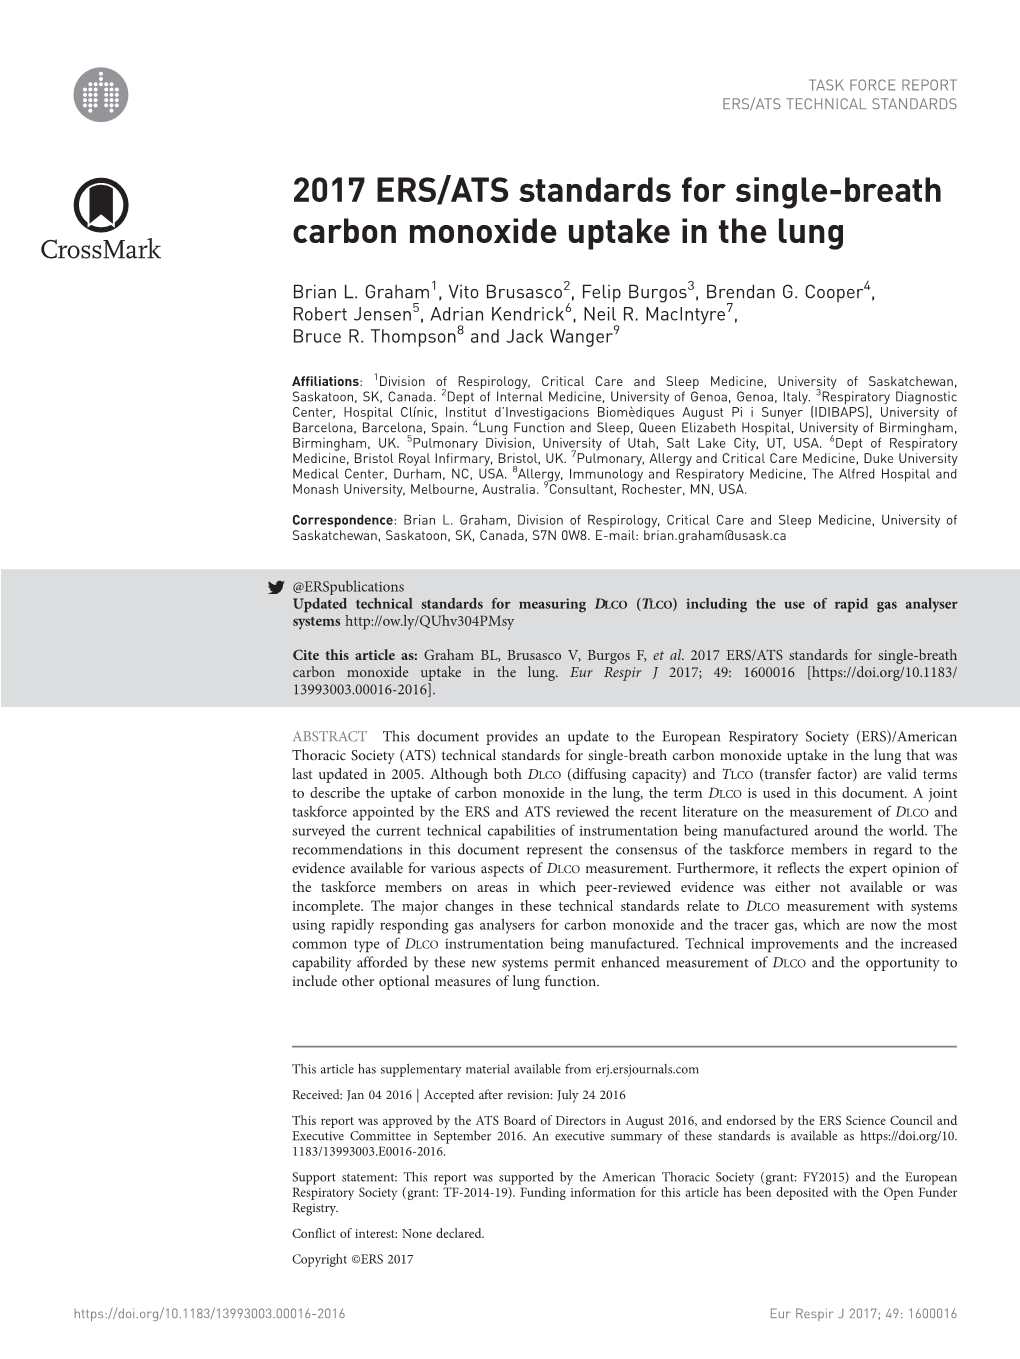 2017 ERS/ATS Standards for Single-Breath Carbon Monoxide Uptake in the Lung